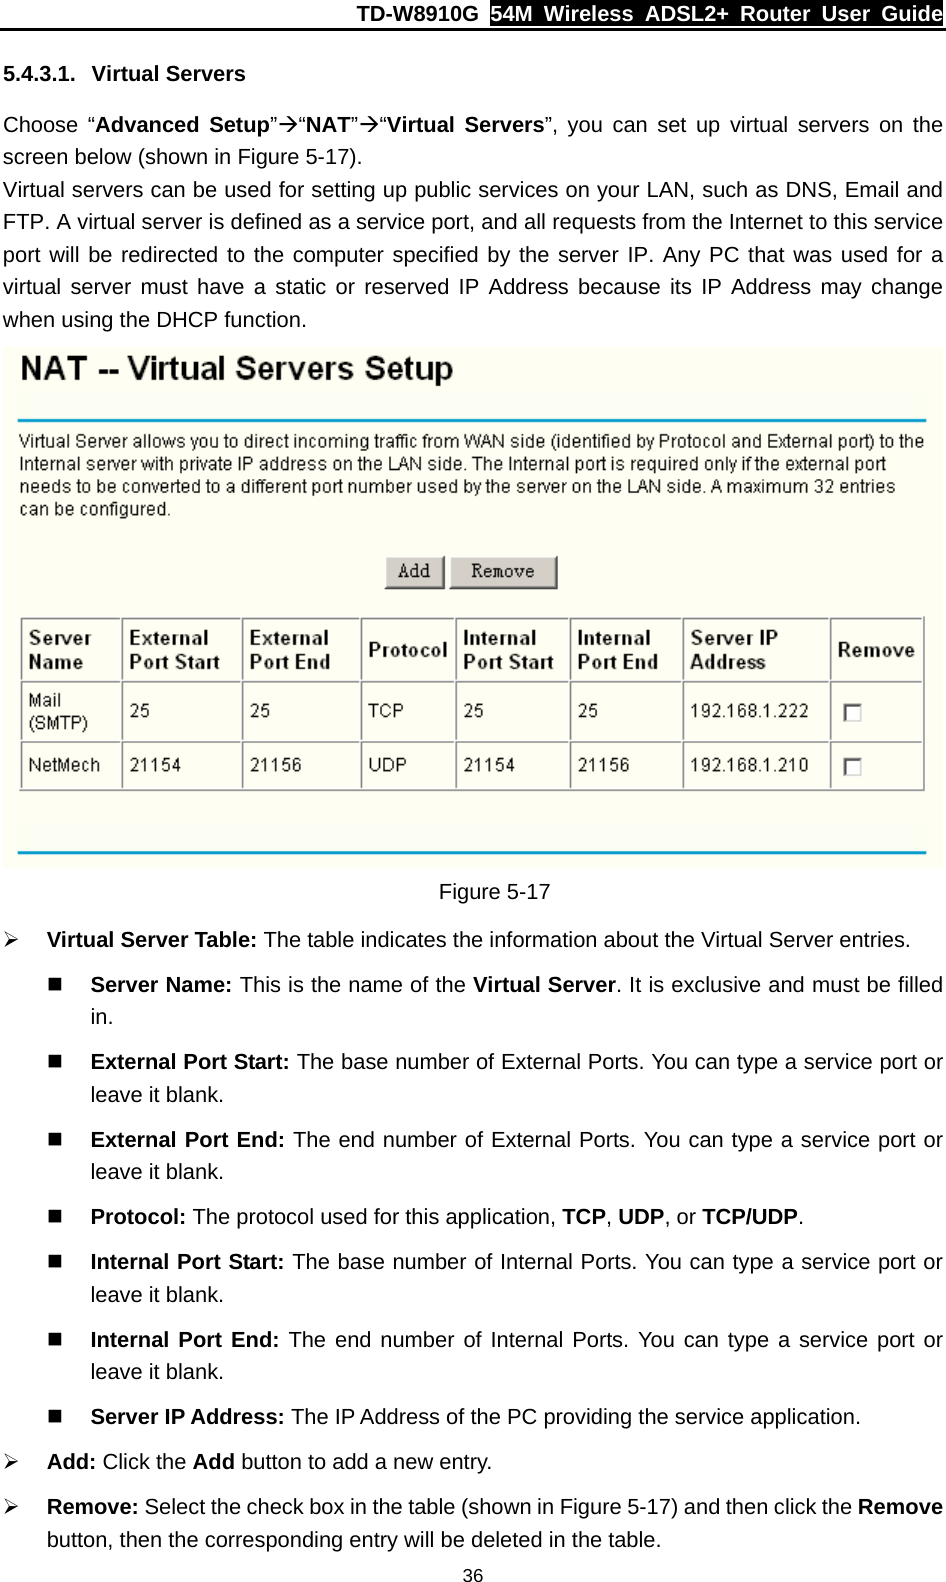 TD-W8910G  54M Wireless ADSL2+ Router User Guide  365.4.3.1. Virtual Servers Choose “Advanced Setup”Æ“NAT”Æ“Virtual Servers”, you can set up virtual servers on the screen below (shown in Figure 5-17). Virtual servers can be used for setting up public services on your LAN, such as DNS, Email and FTP. A virtual server is defined as a service port, and all requests from the Internet to this service port will be redirected to the computer specified by the server IP. Any PC that was used for a virtual server must have a static or reserved IP Address because its IP Address may change when using the DHCP function.  Figure 5-17 ¾ Virtual Server Table: The table indicates the information about the Virtual Server entries.  Server Name: This is the name of the Virtual Server. It is exclusive and must be filled in.  External Port Start: The base number of External Ports. You can type a service port or leave it blank.  External Port End: The end number of External Ports. You can type a service port or leave it blank.  Protocol: The protocol used for this application, TCP, UDP, or TCP/UDP.  Internal Port Start: The base number of Internal Ports. You can type a service port or leave it blank.  Internal Port End: The end number of Internal Ports. You can type a service port or leave it blank.  Server IP Address: The IP Address of the PC providing the service application. ¾ Add: Click the Add button to add a new entry. ¾ Remove: Select the check box in the table (shown in Figure 5-17) and then click the Remove button, then the corresponding entry will be deleted in the table. 